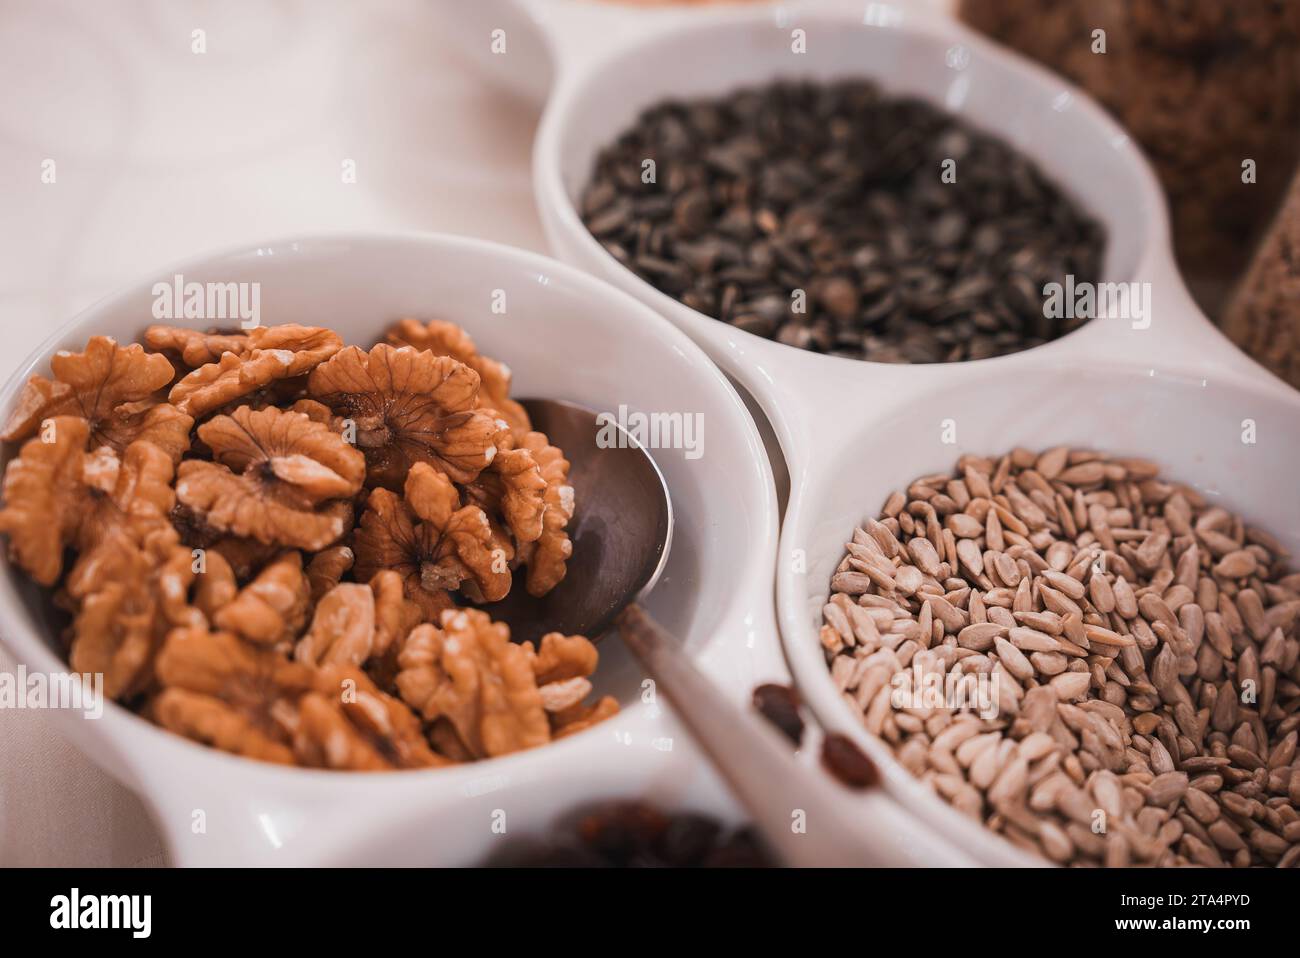 Assorted nuts and seeds in bowl on table in dim lighting, Venetian hotel interior. Stock Photo